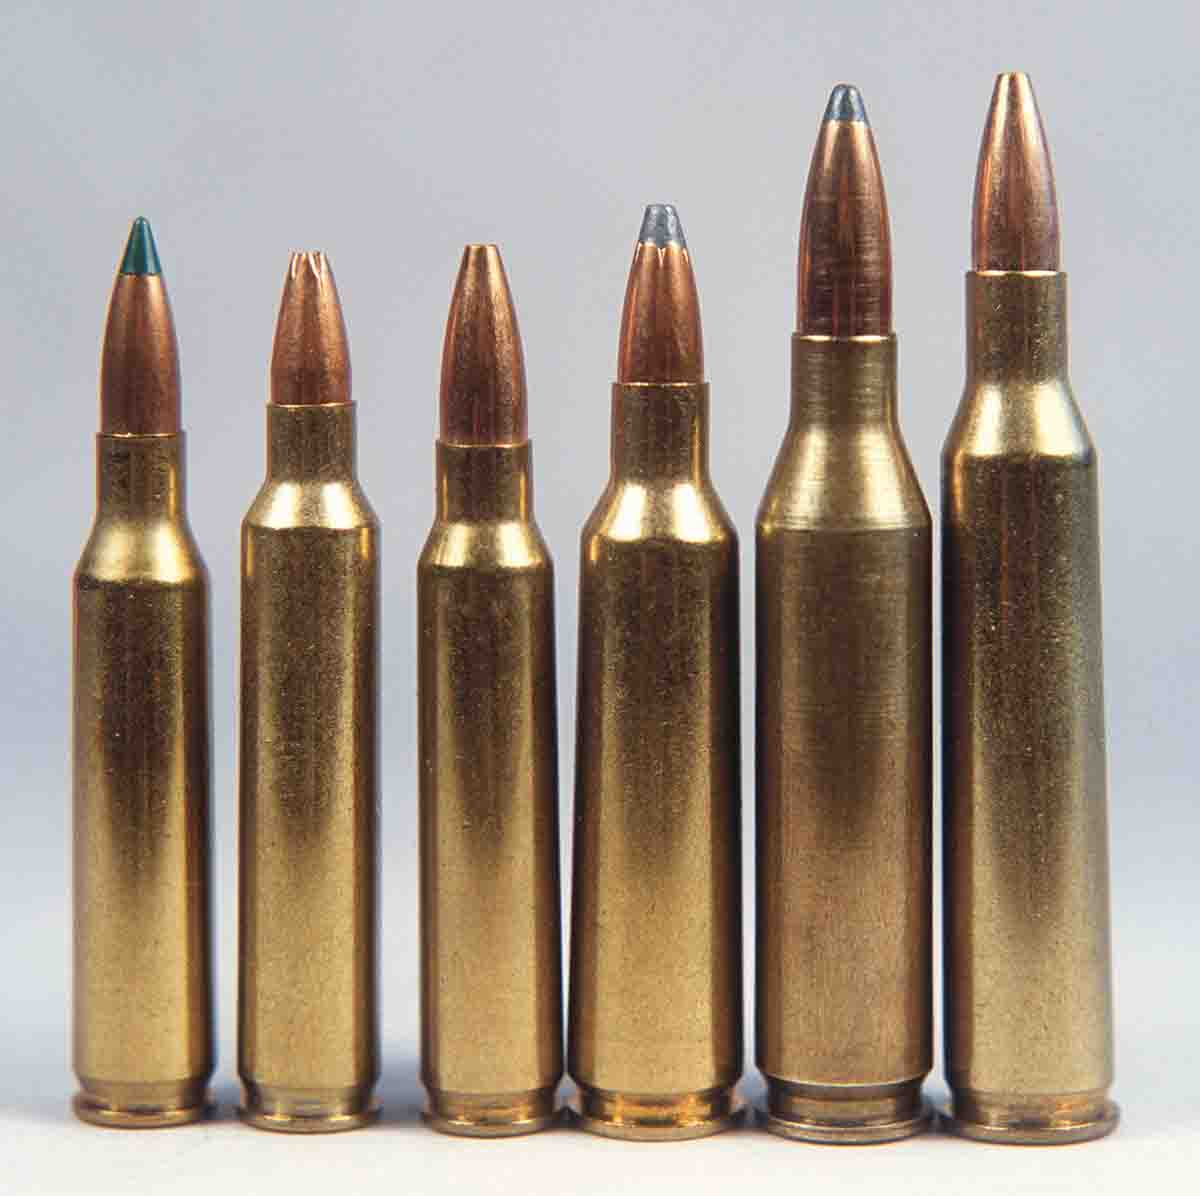 Dick has used numerous varmint cartridges, but his favorites include (left to right): .20 Tactical, .204 Ruger, .223 Remington, .22-250 Remington, .243 Winchester and .220 Swift.